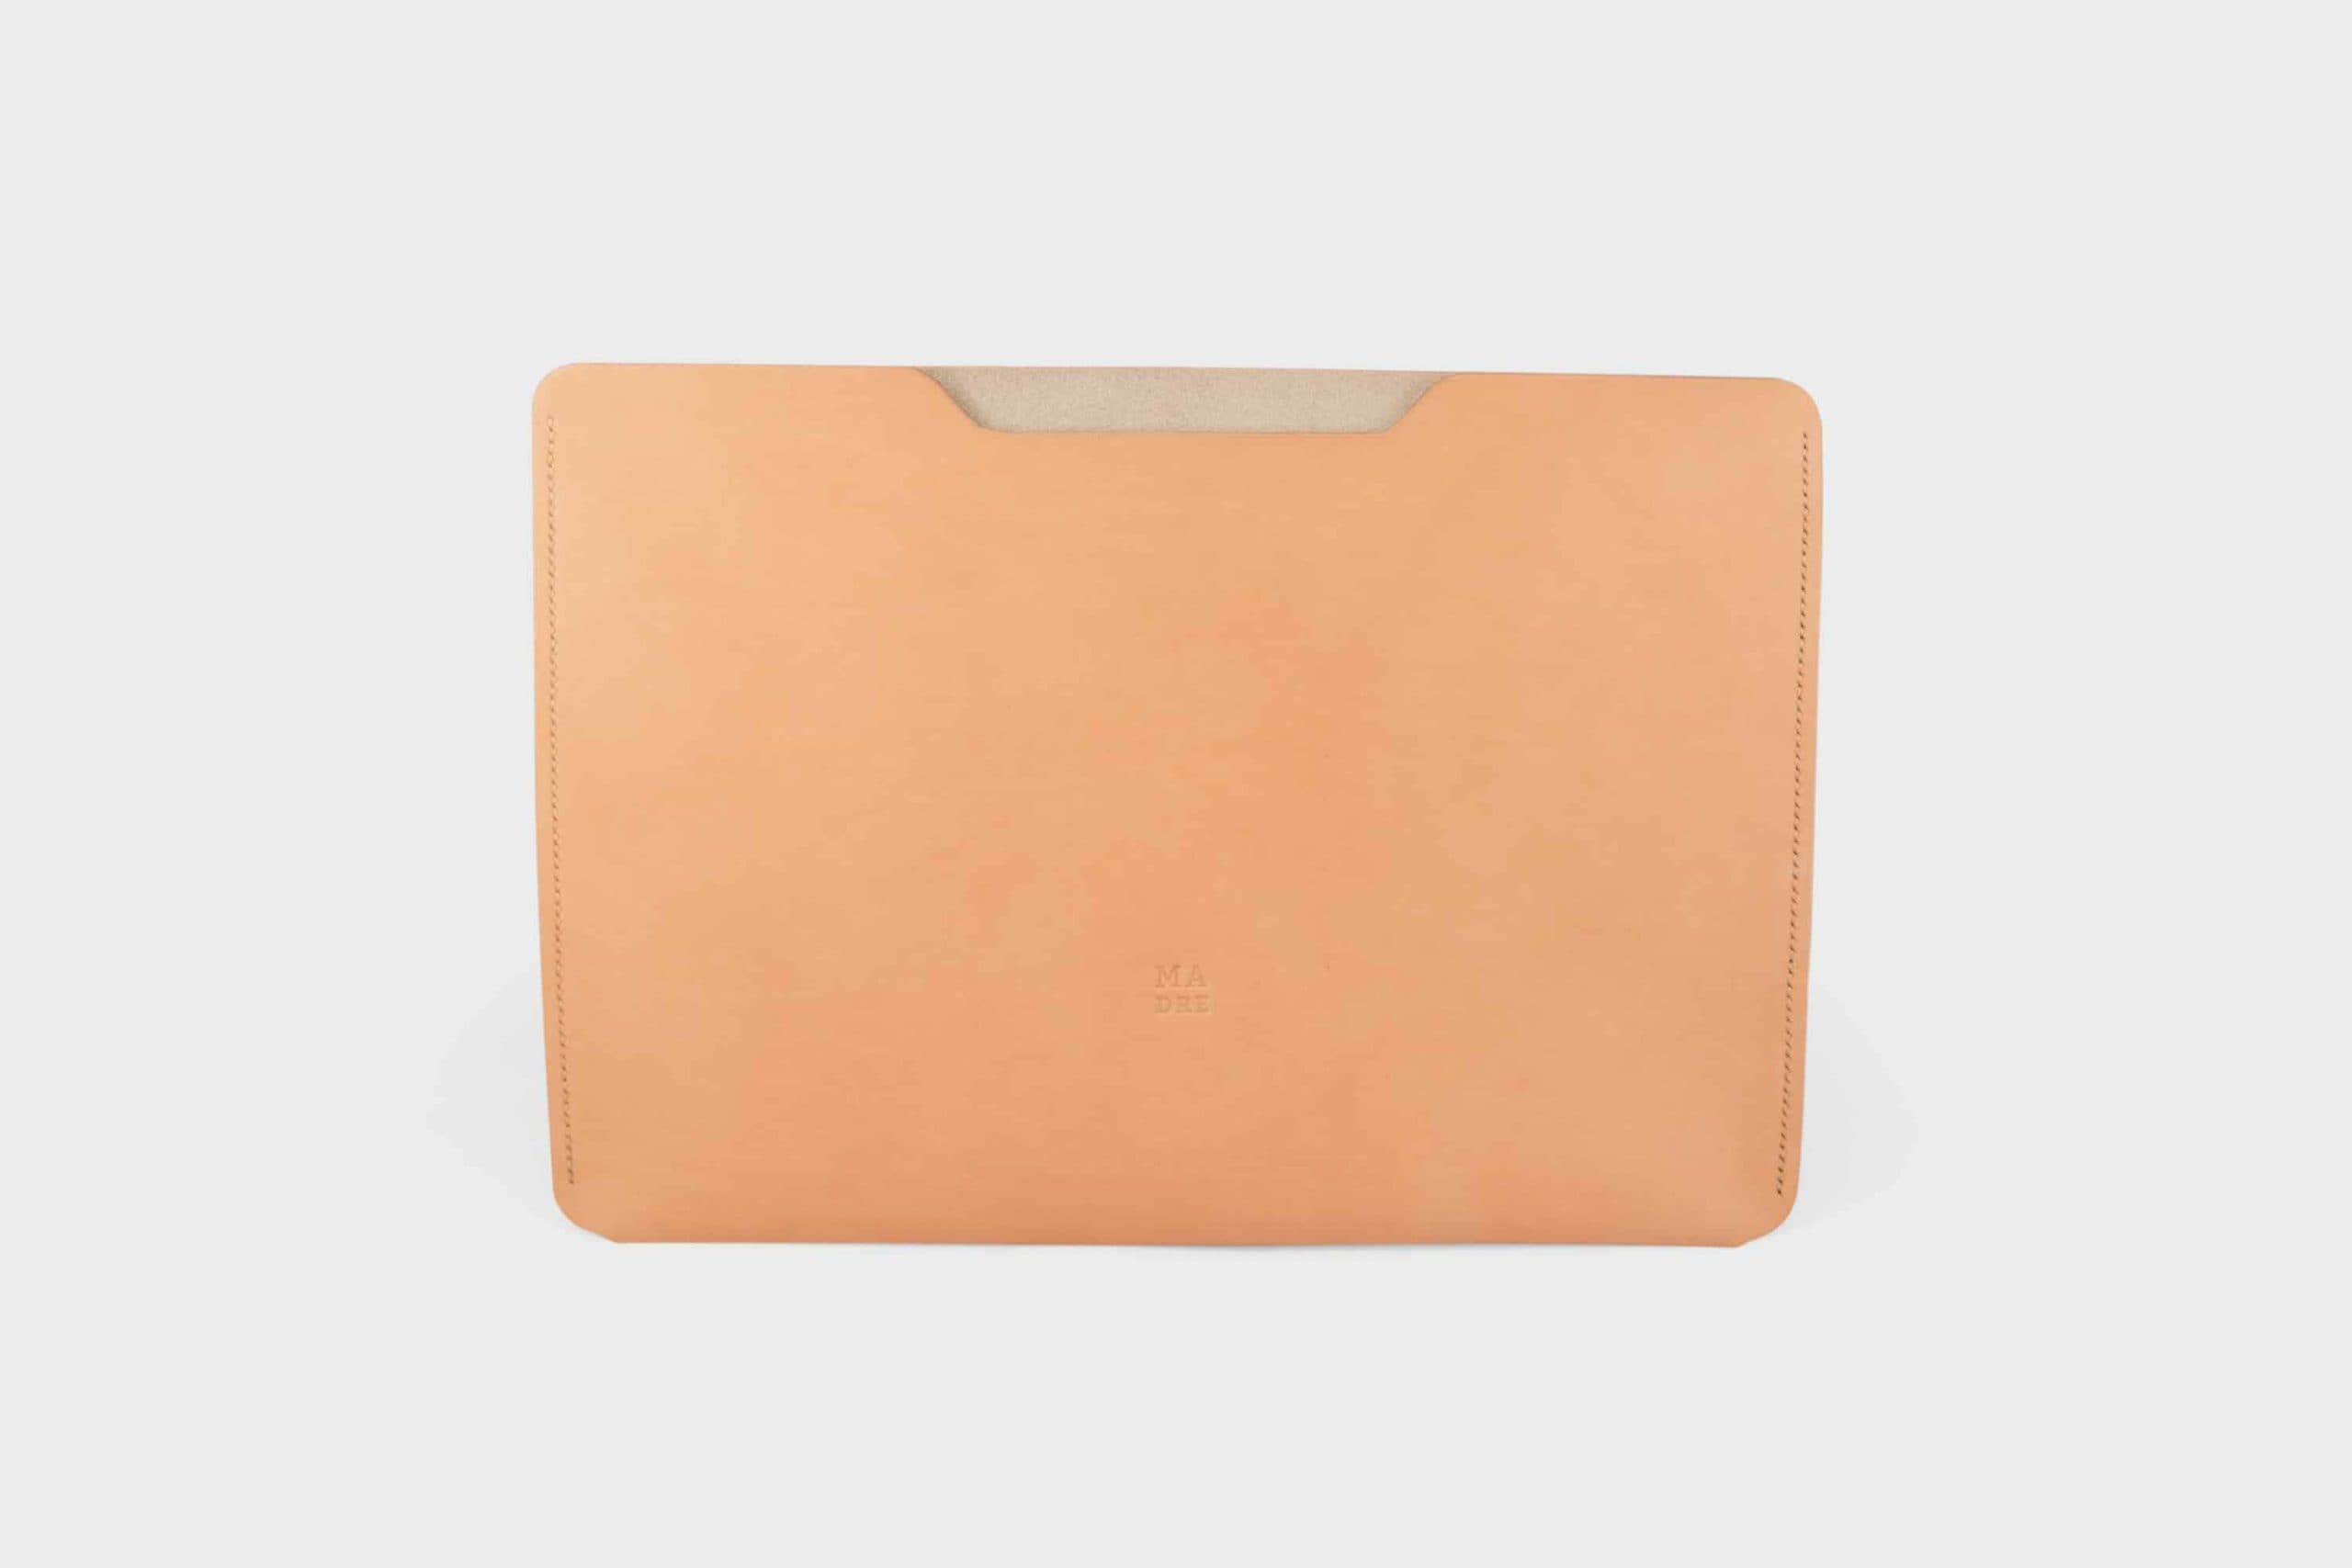 Sleeve for iPad Pro 12.9 Inch in Brown Leather